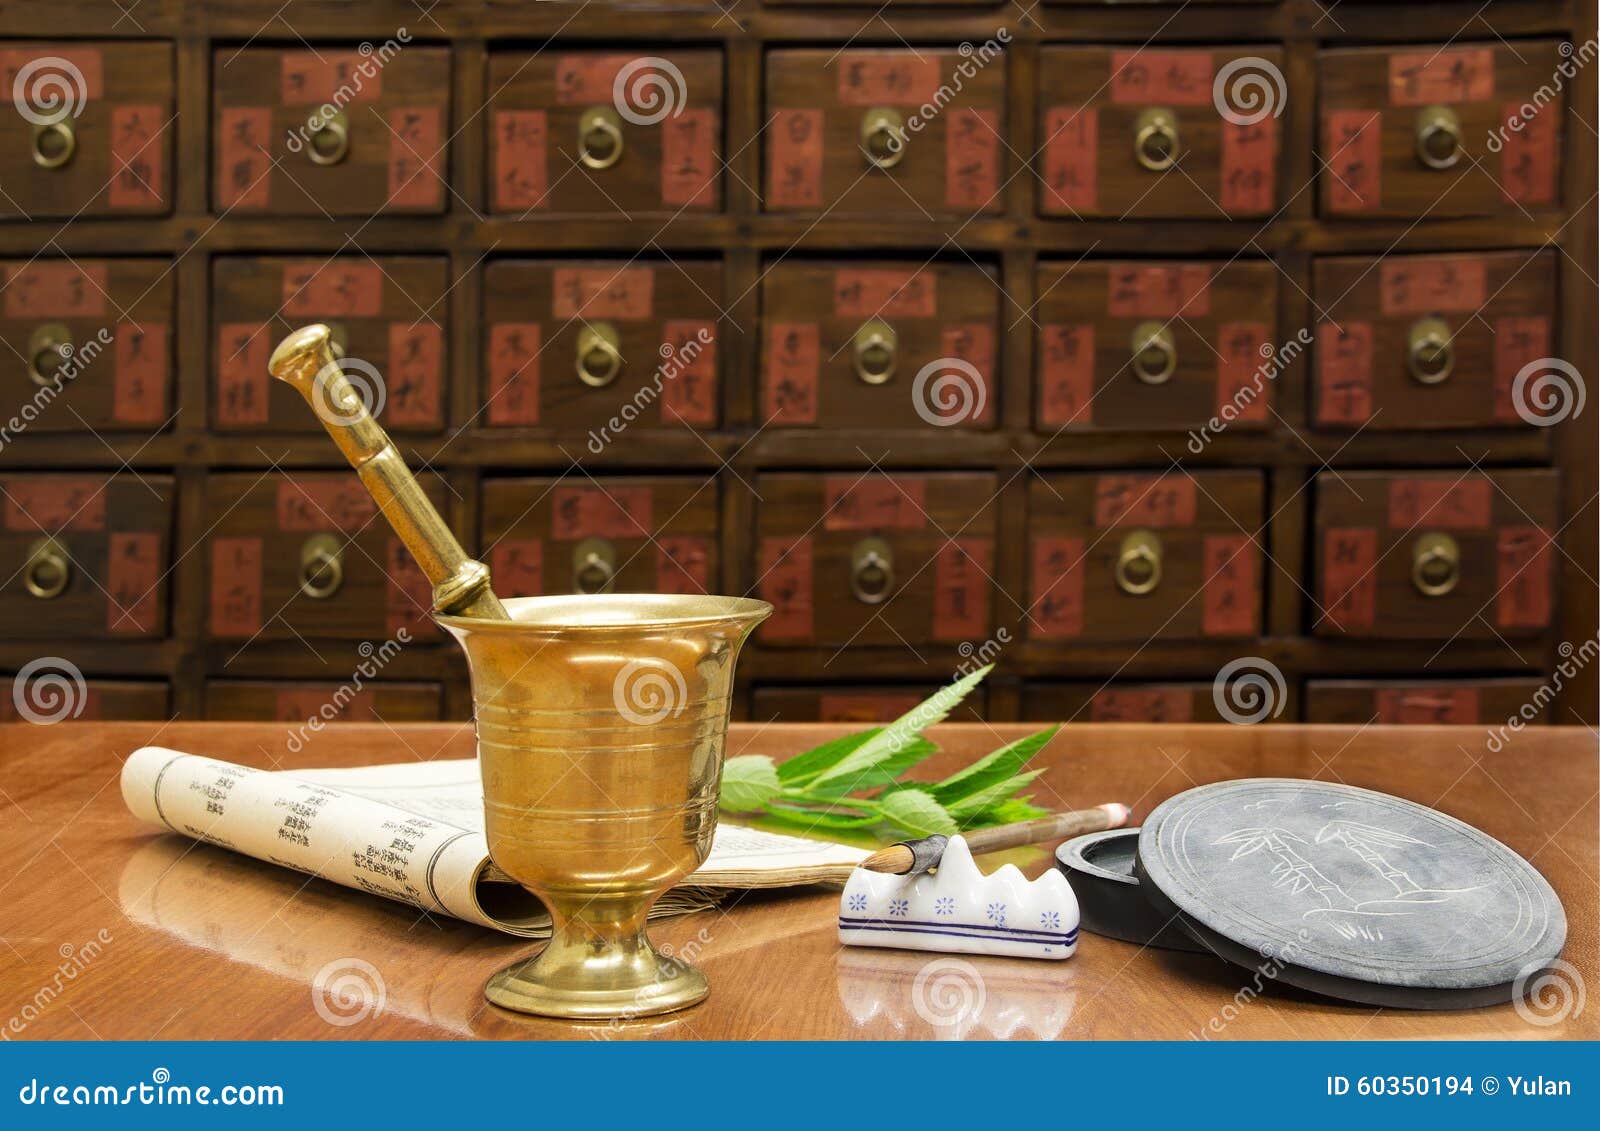 Traditional Chinese Medicine Shop Stock Photo Image